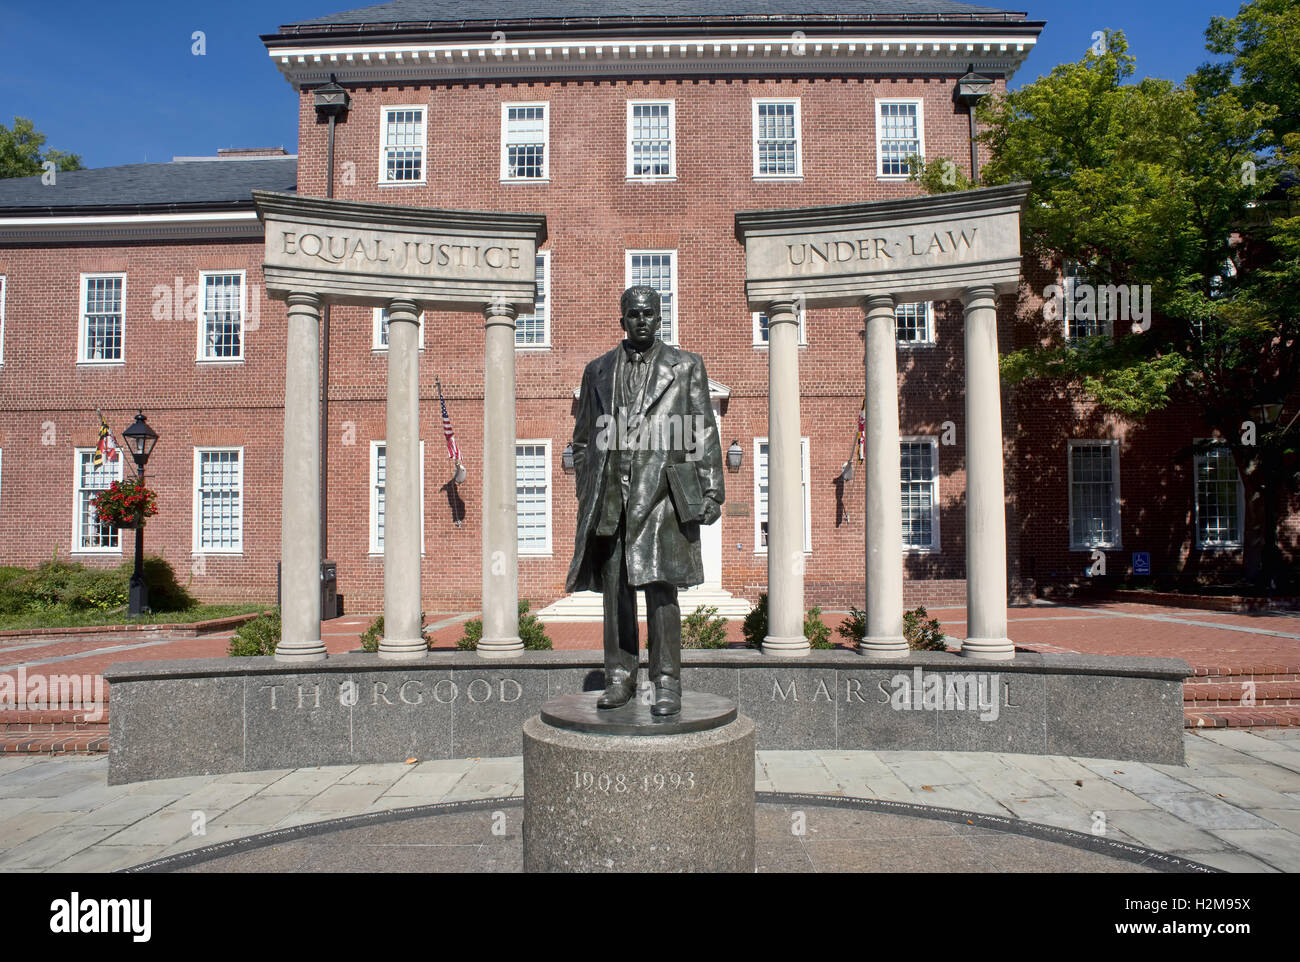 Annapolis, Maryland - Sept. 25,2016 US Supreme Court Justice Thurgood Marshall Statue mit Equal Justice Under Law. Stockfoto